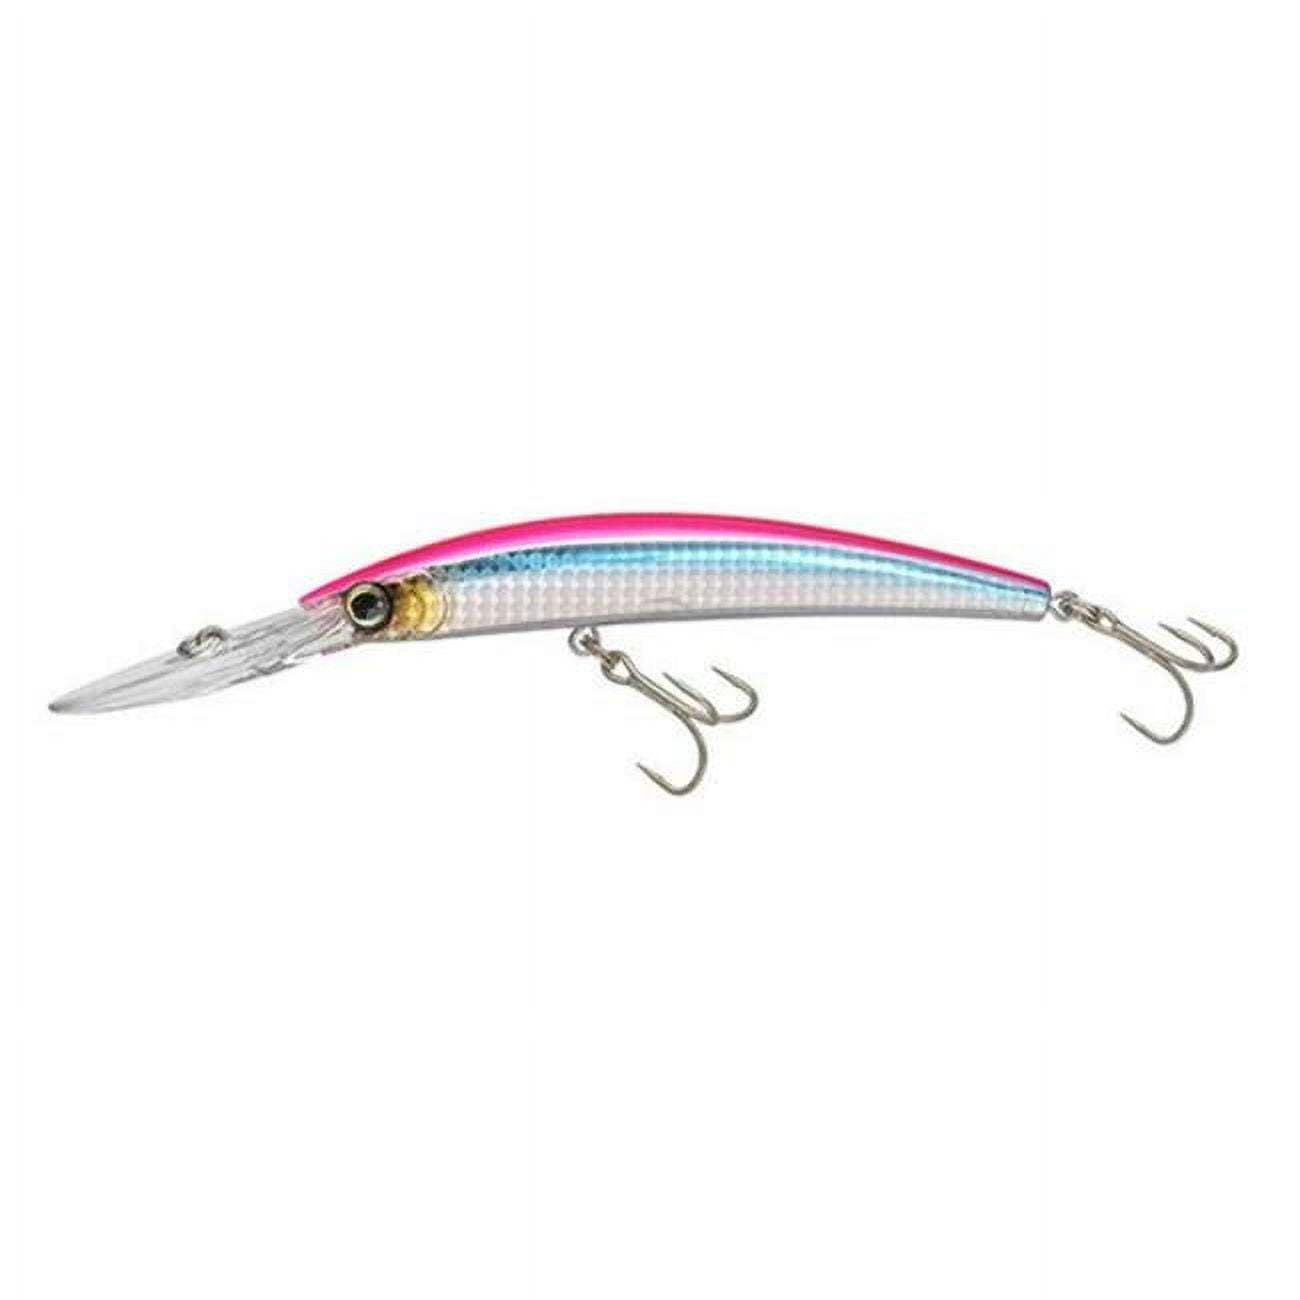 Yo-Zuri R1166-CPHP 3D Squirt Floating Lure, Hot Pink, 190mm 7-1/2